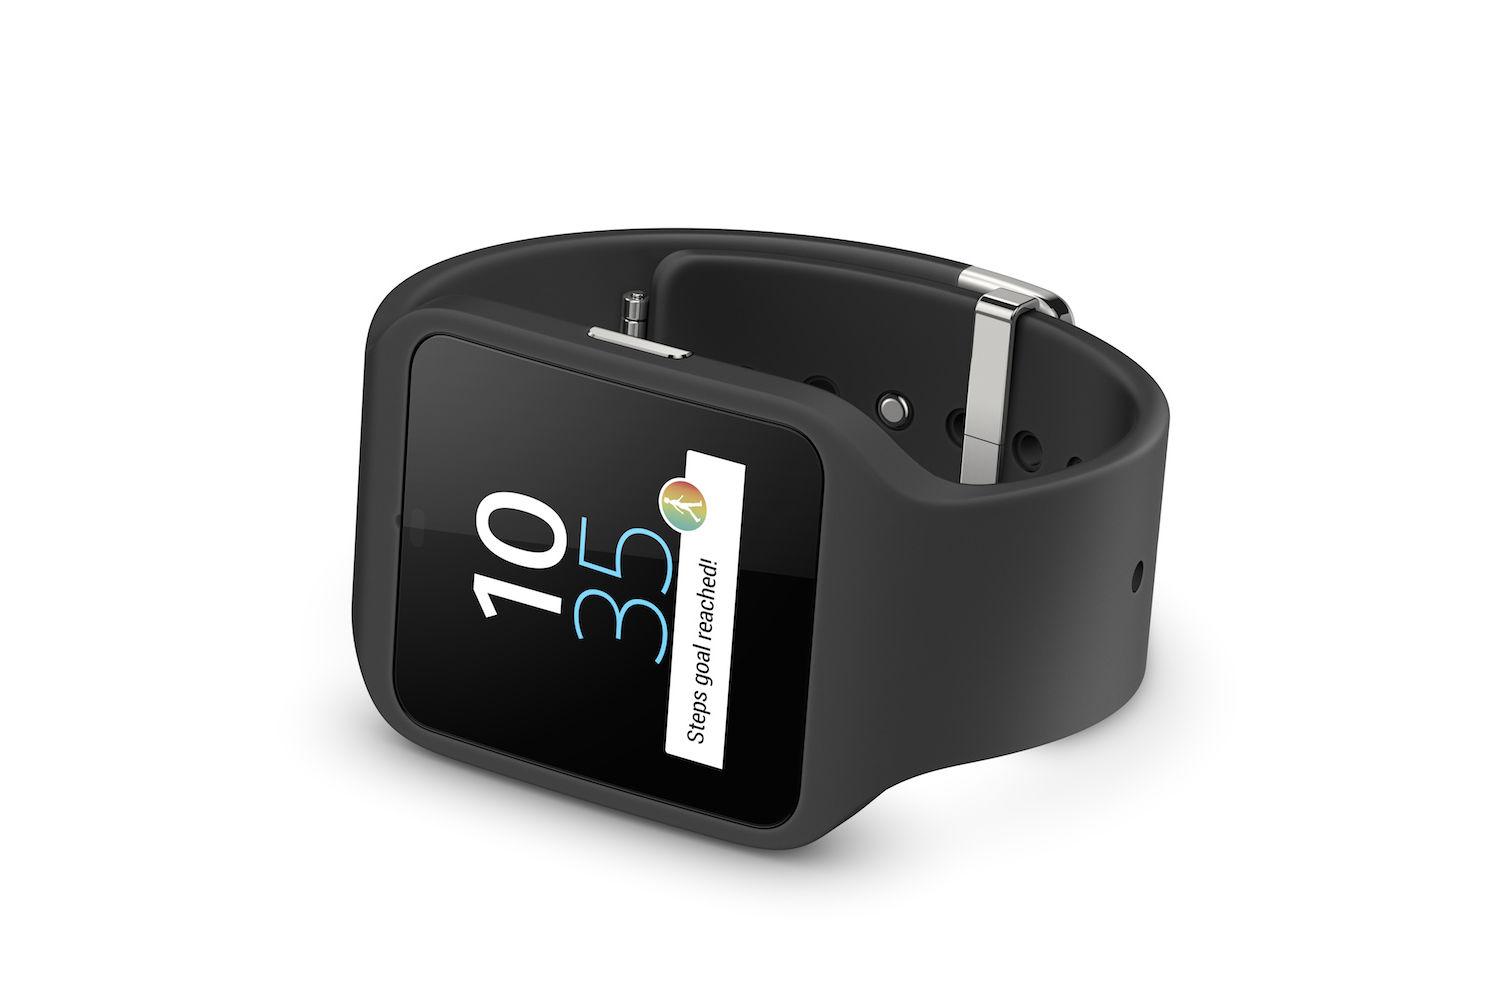 Sony Reveals SmartWatch 3 and SmartBand Talk at IFA | Digital Trends